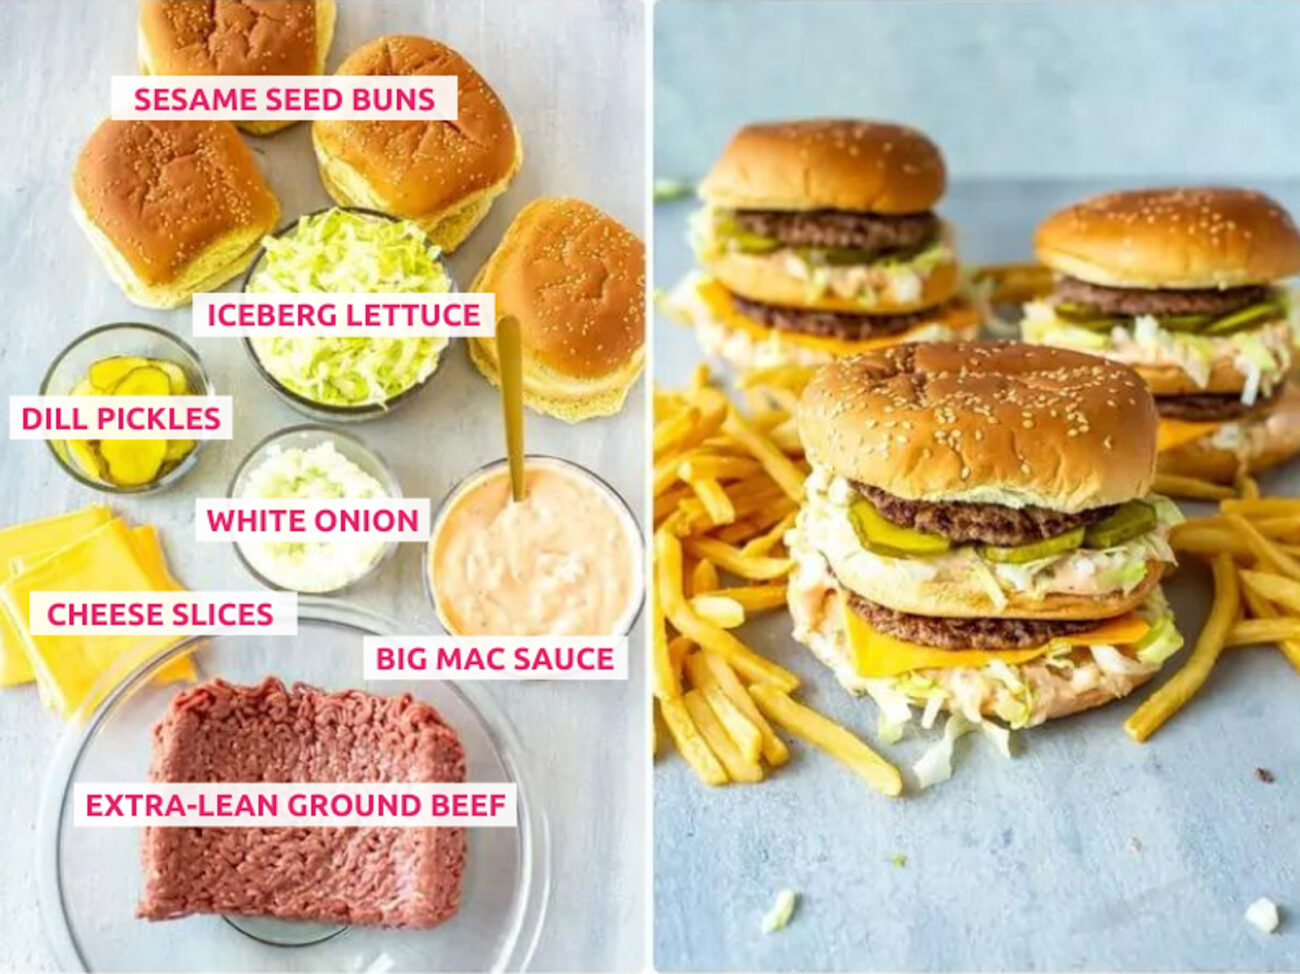 Ingredients for homemade big mac: extra-lean ground beef, hamburger buns, iceberg lettuce, cheese slices, white onion, dill pickles and big mac sauce.